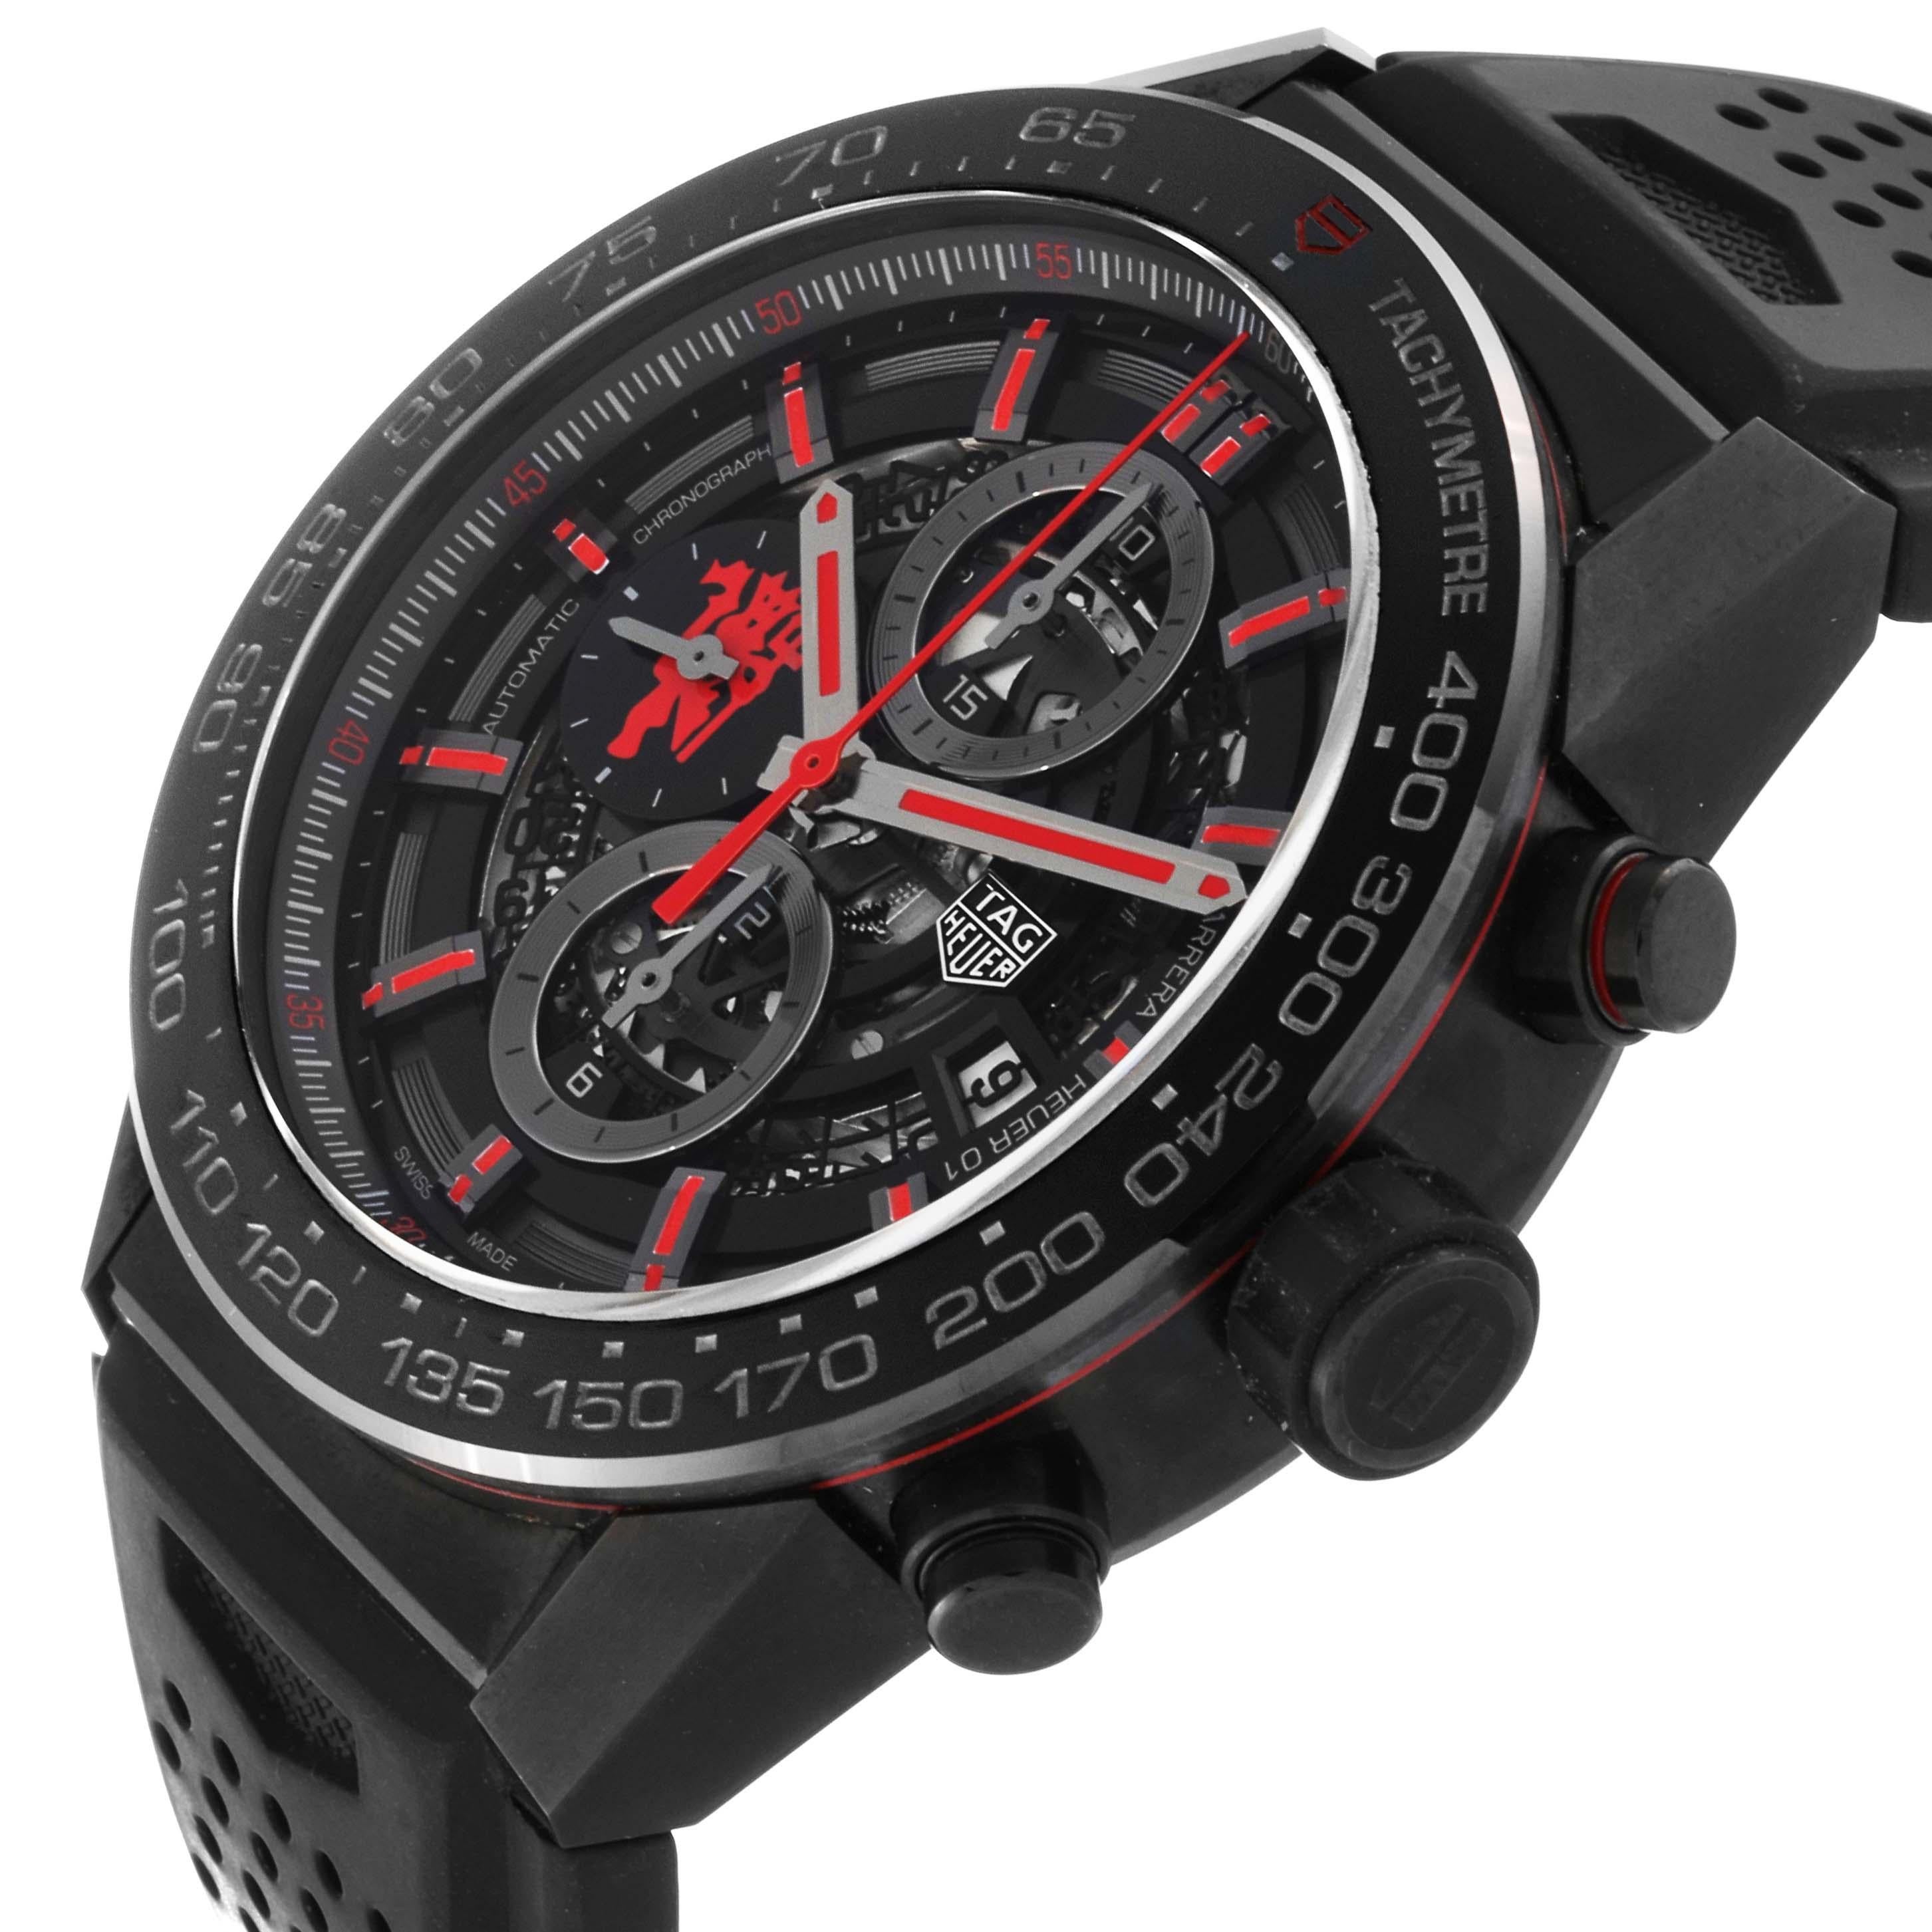 Tag Heuer Carrera Manchester United Limited Edition Steel Mens Watch CAR2A1J Box Card. Automatic self-winding chronograph movement. Stainless steel case 45.0 mm. Transparent exhibition sapphire crystal case back with ''red devil'' print. Black bezel